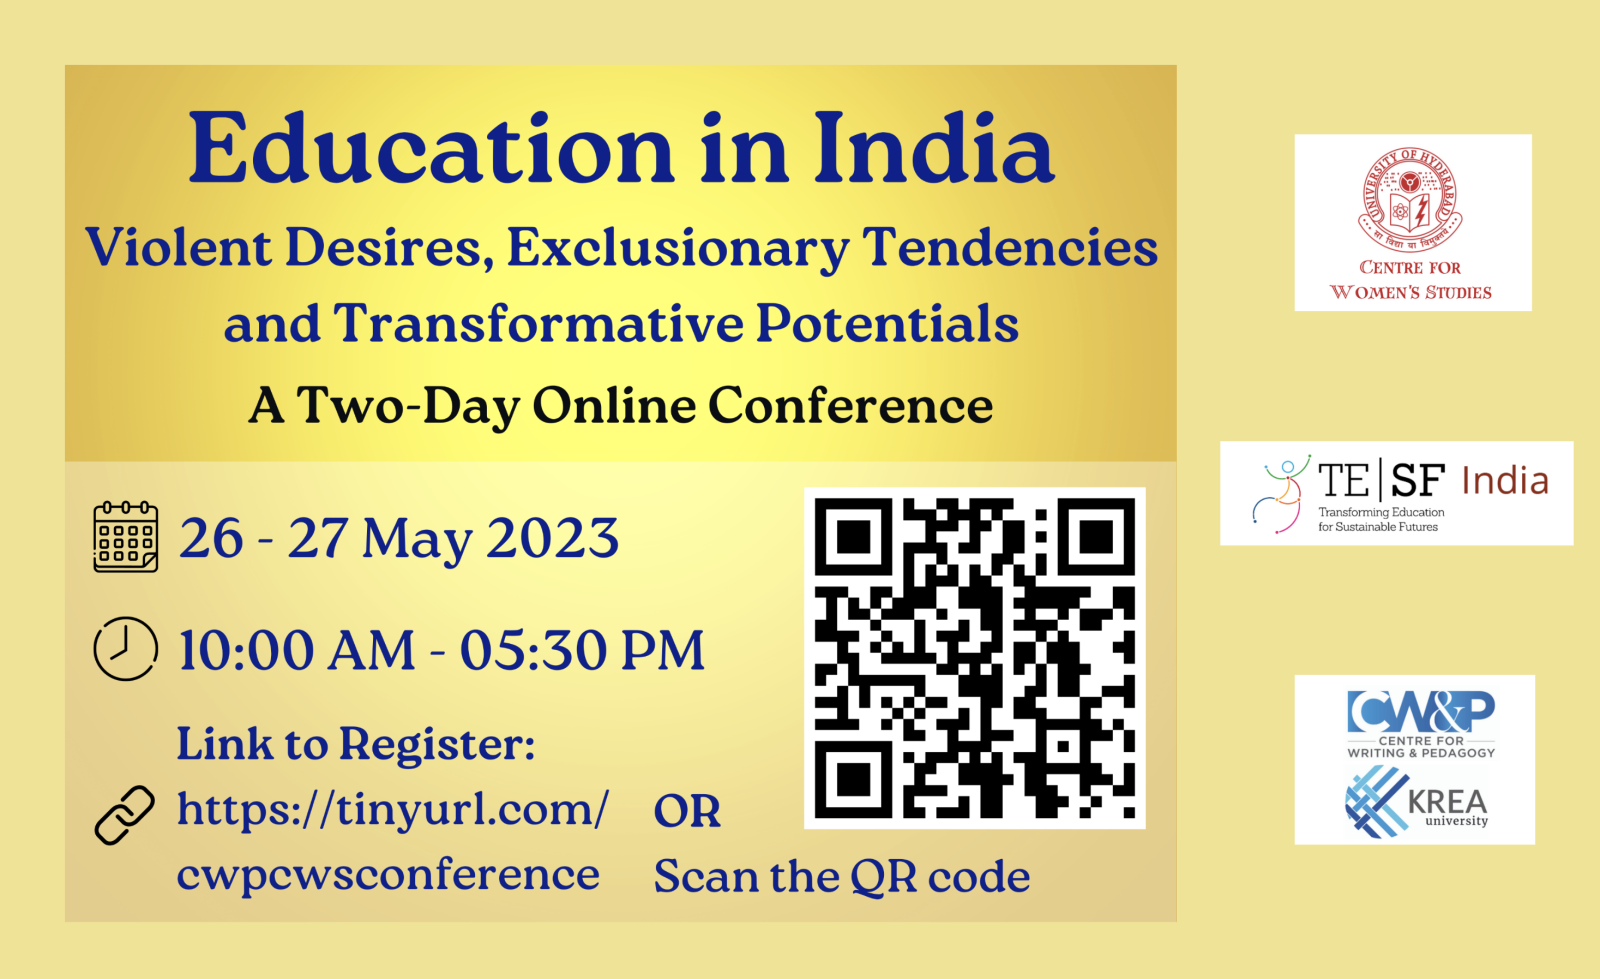 As&#x20;crisis&#x20;grips&#x20;education&#x20;in&#x20;India,&#x20;a&#x20;two-day&#x20;conference&#x20;deliberates&#x20;on&#x20;the&#x20;way&#x20;forward